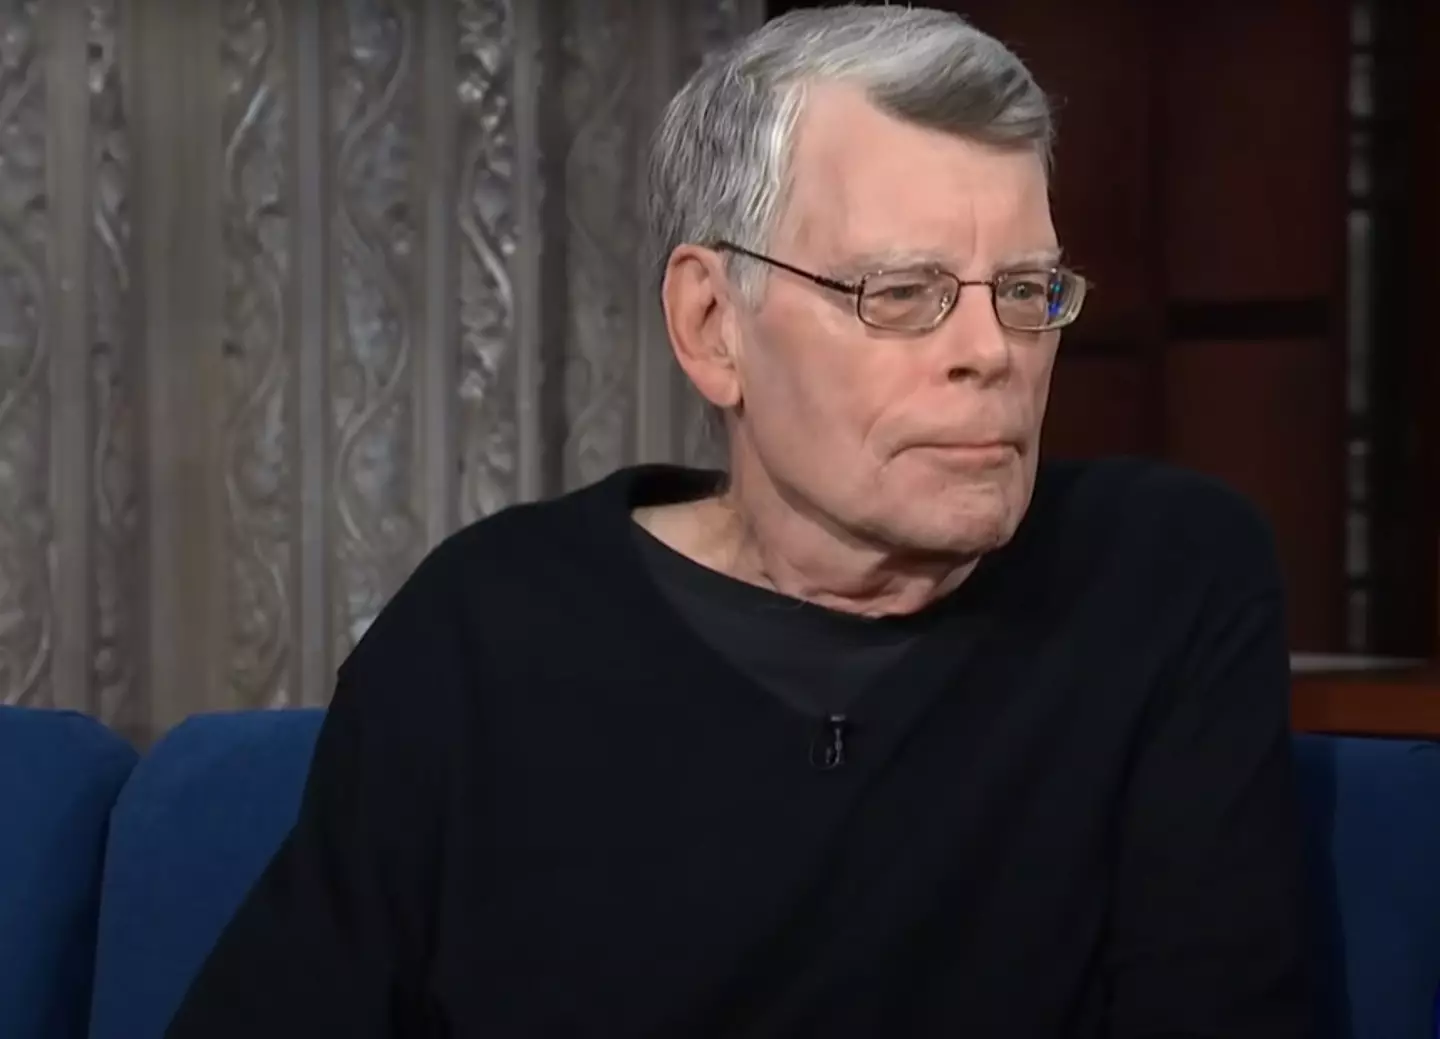 Stephen King wrote Rage while he was in high school.